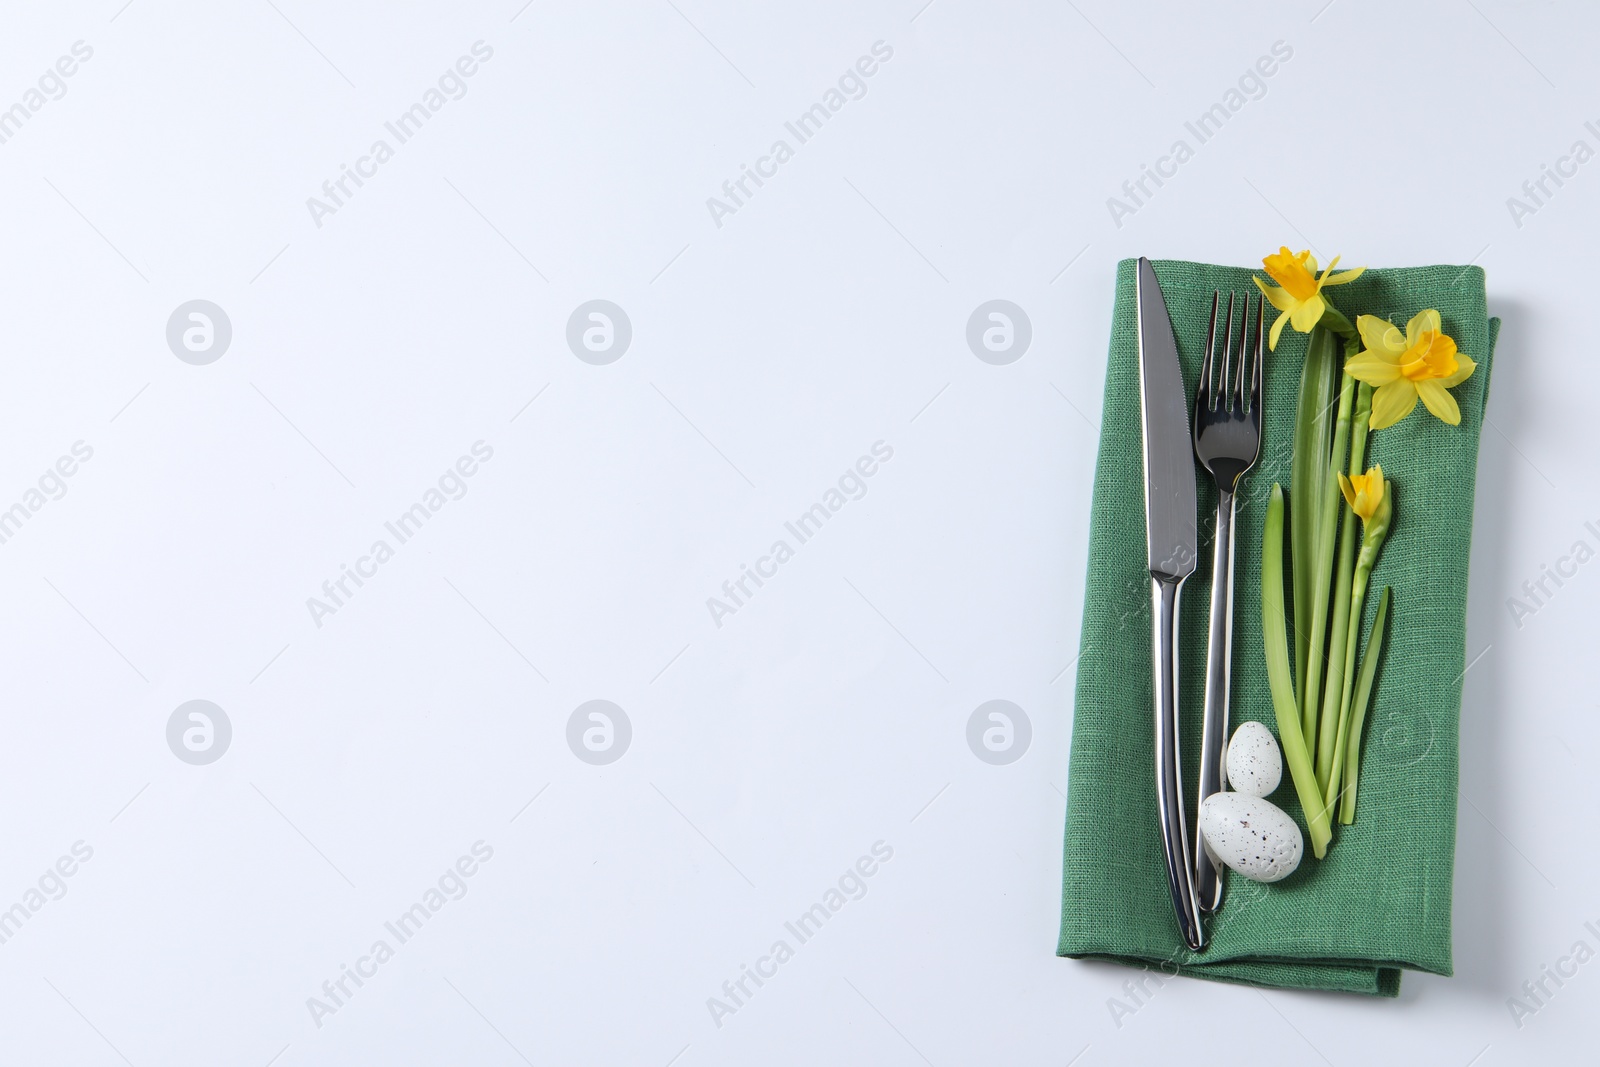 Photo of Cutlery set, Easter eggs and narcissuses on white background, top view with space for text. Festive table setting